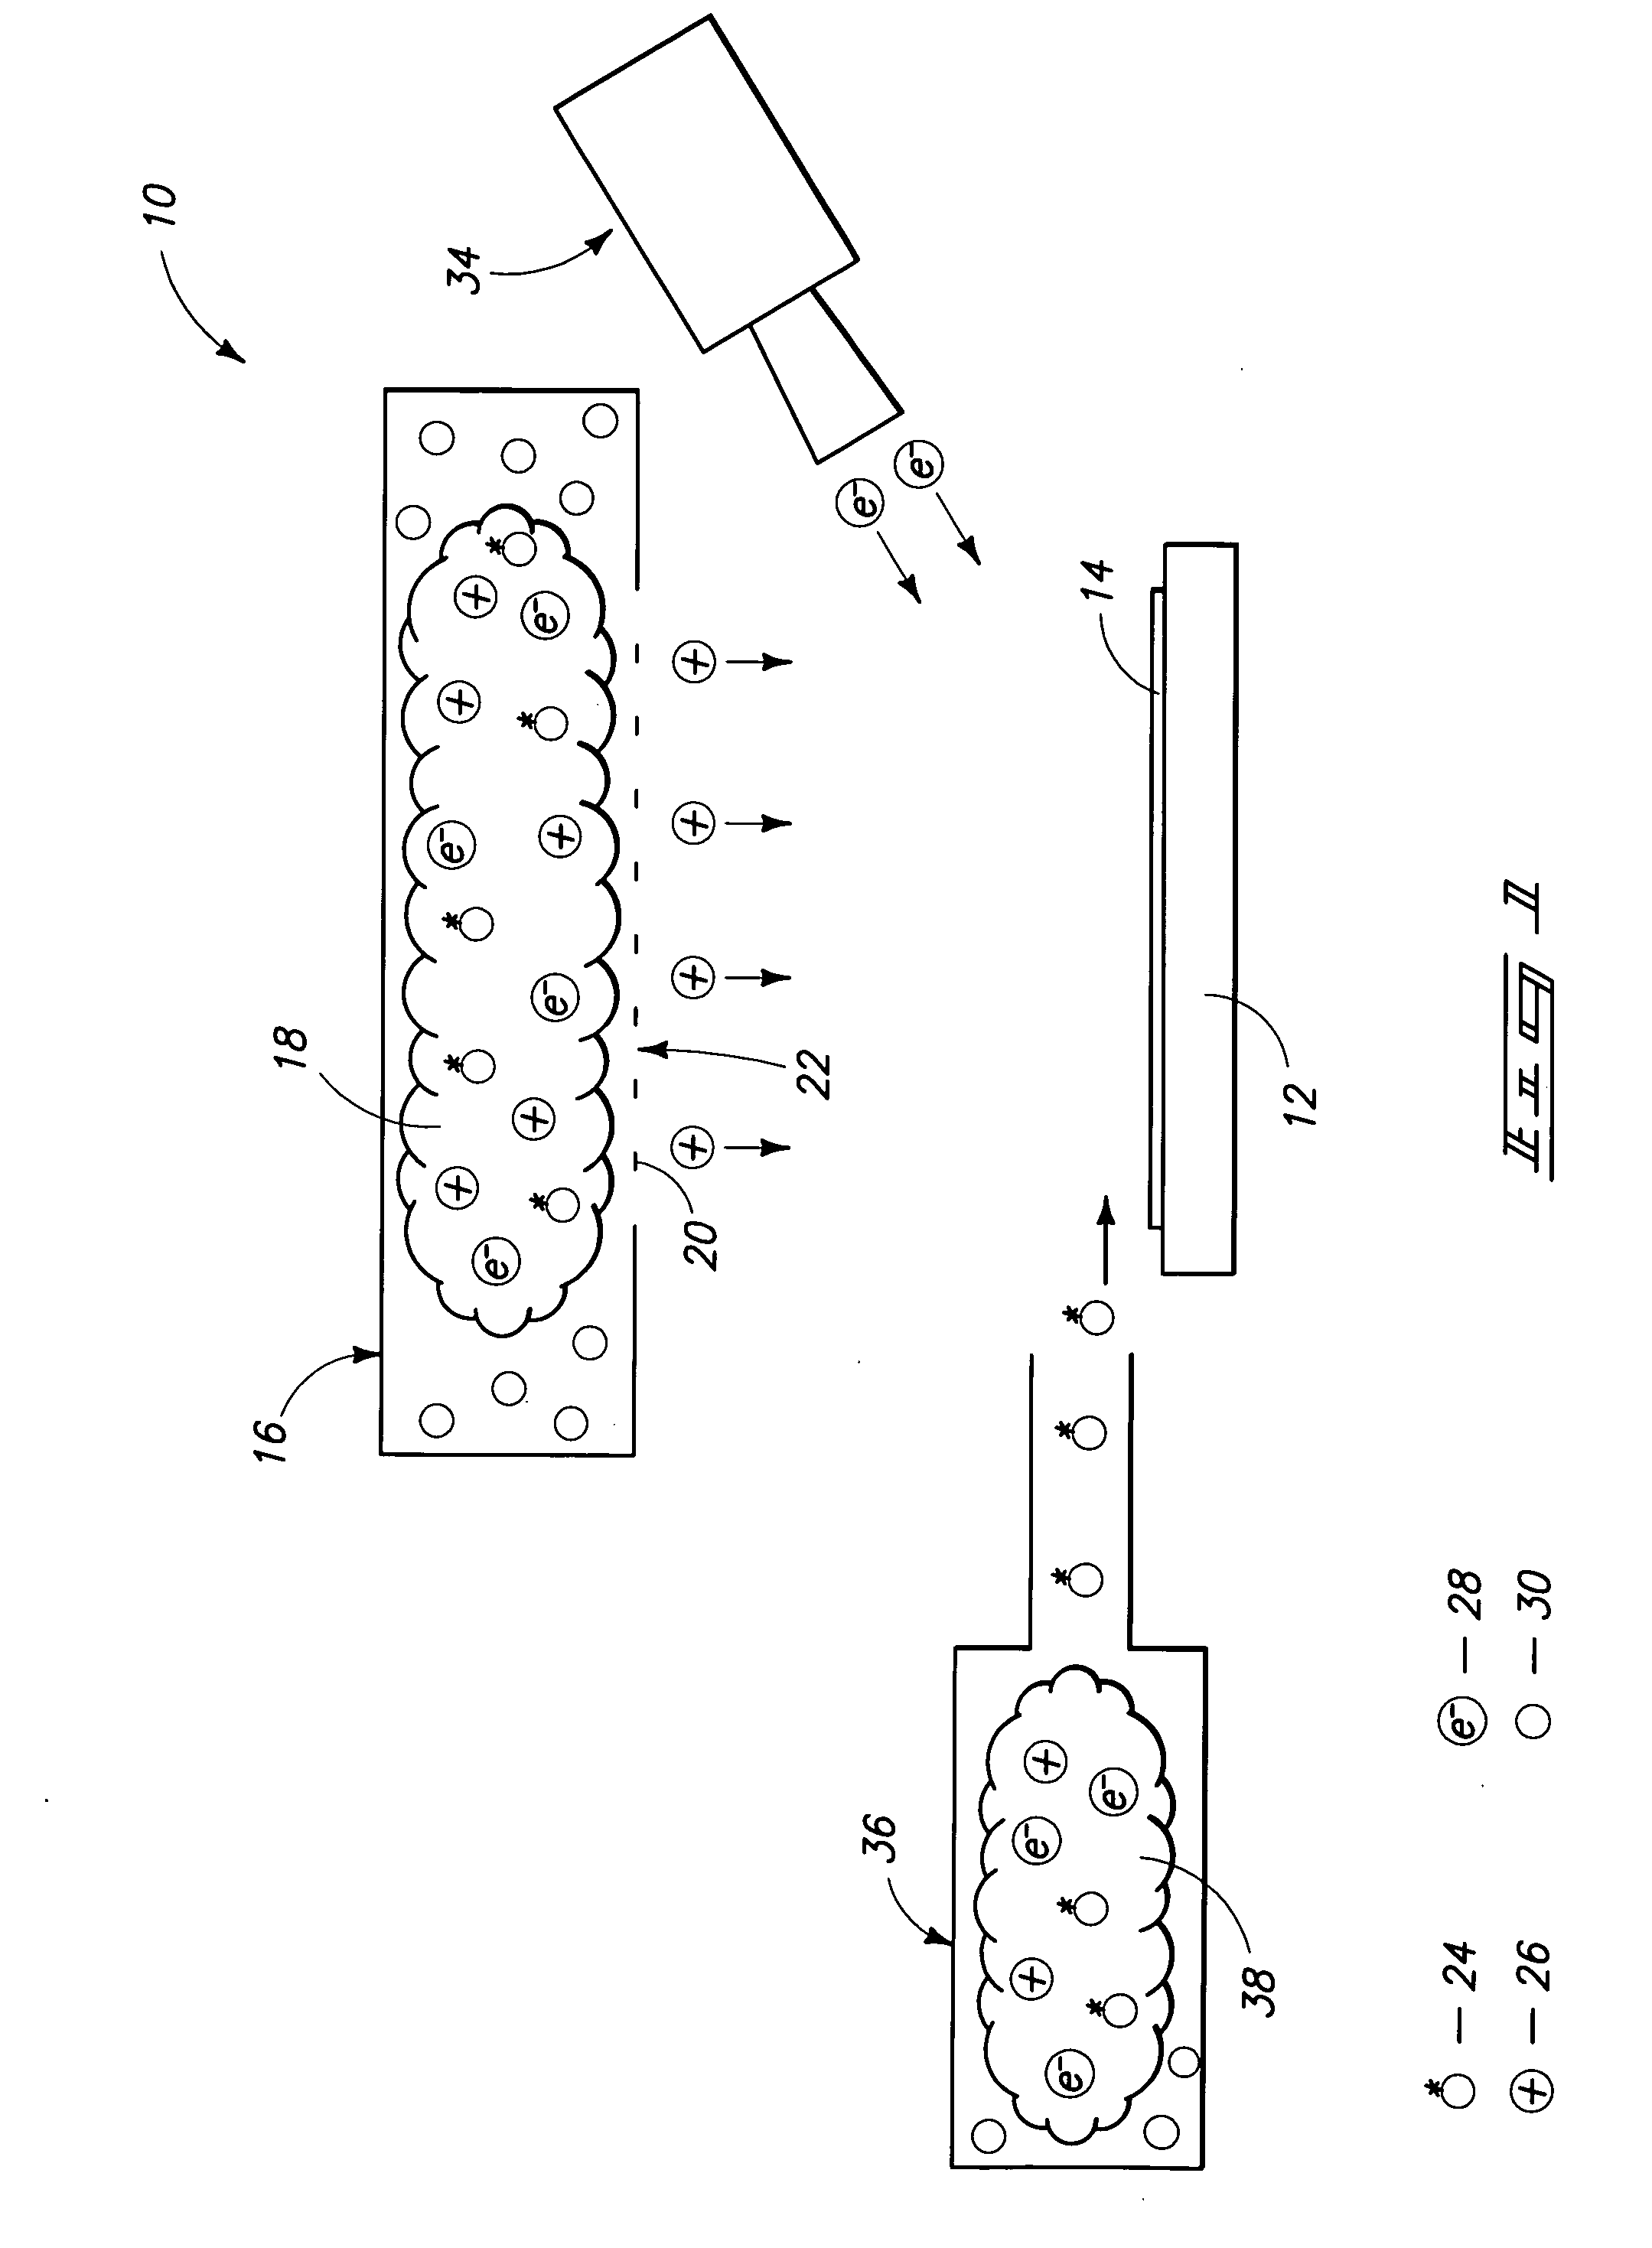 Plasma processing apparatuses and methods